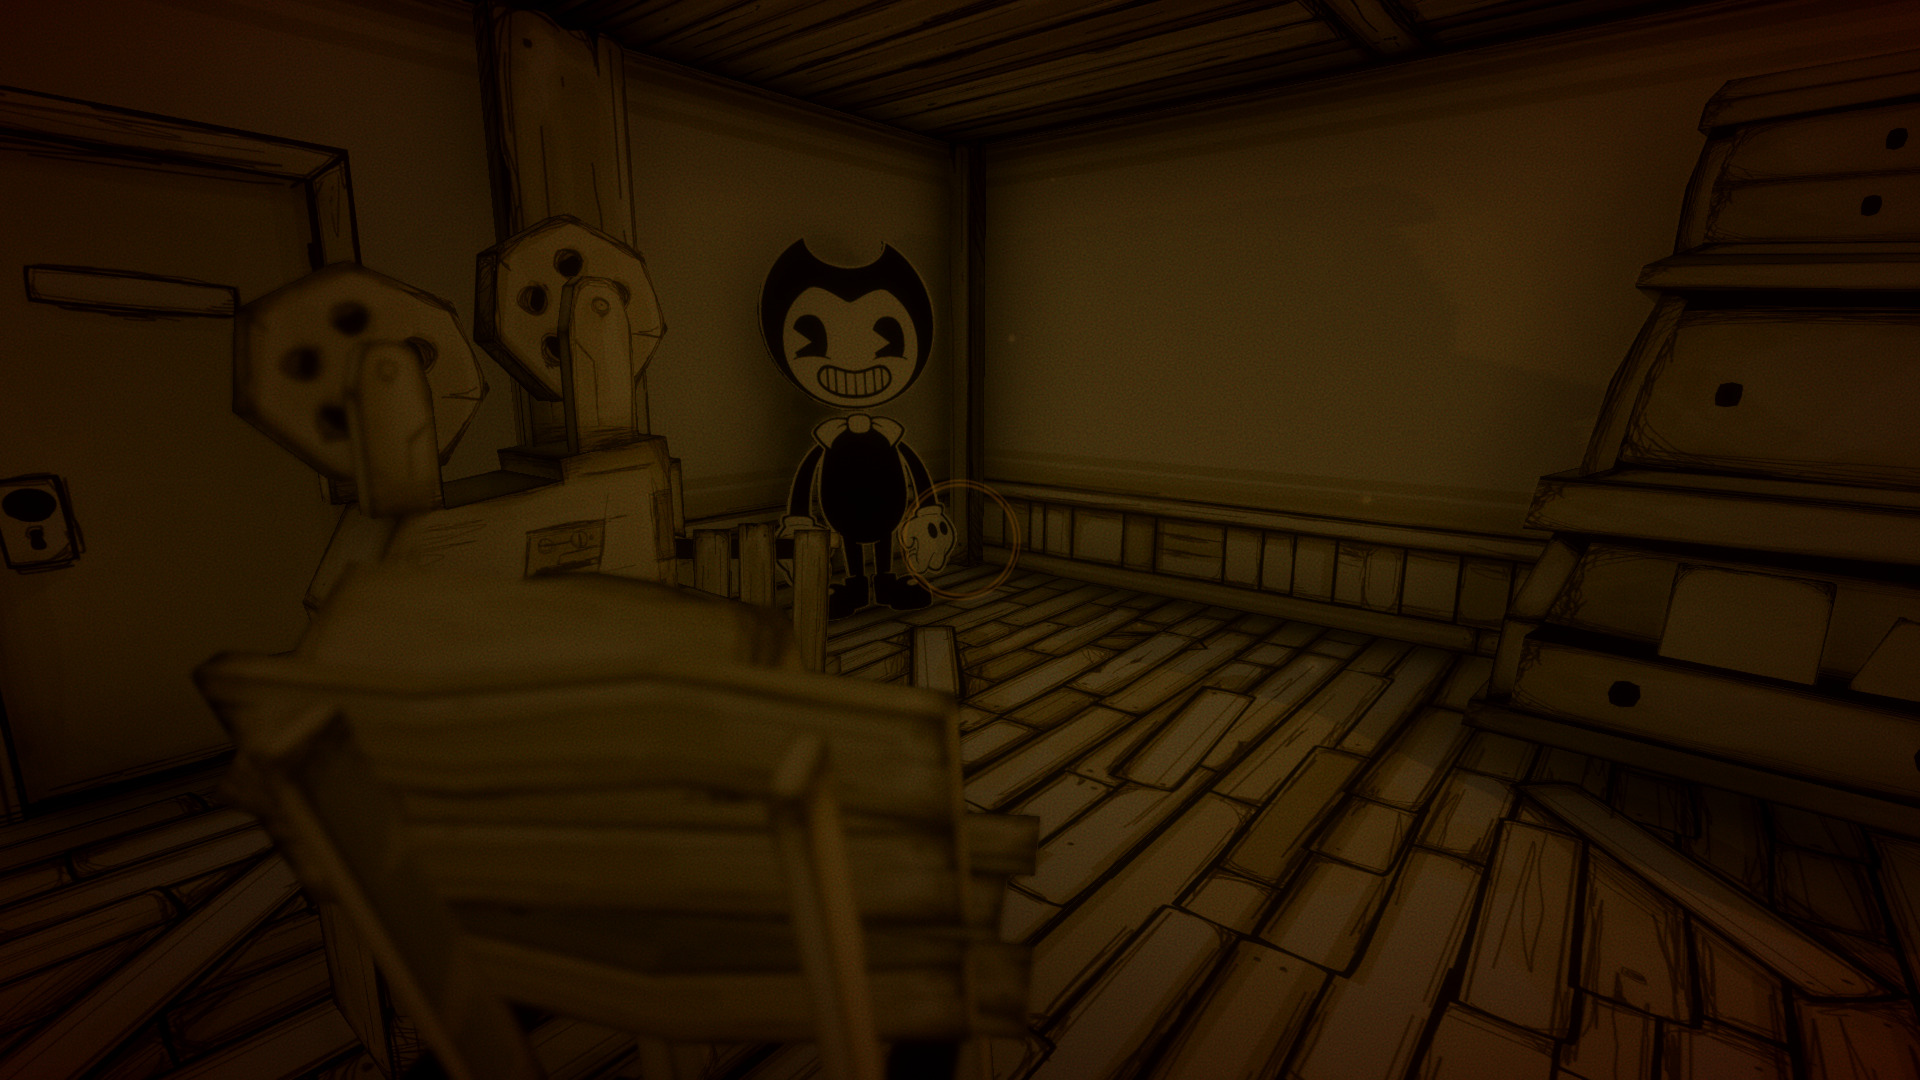 Bendy and the Ink Machine - Lutris